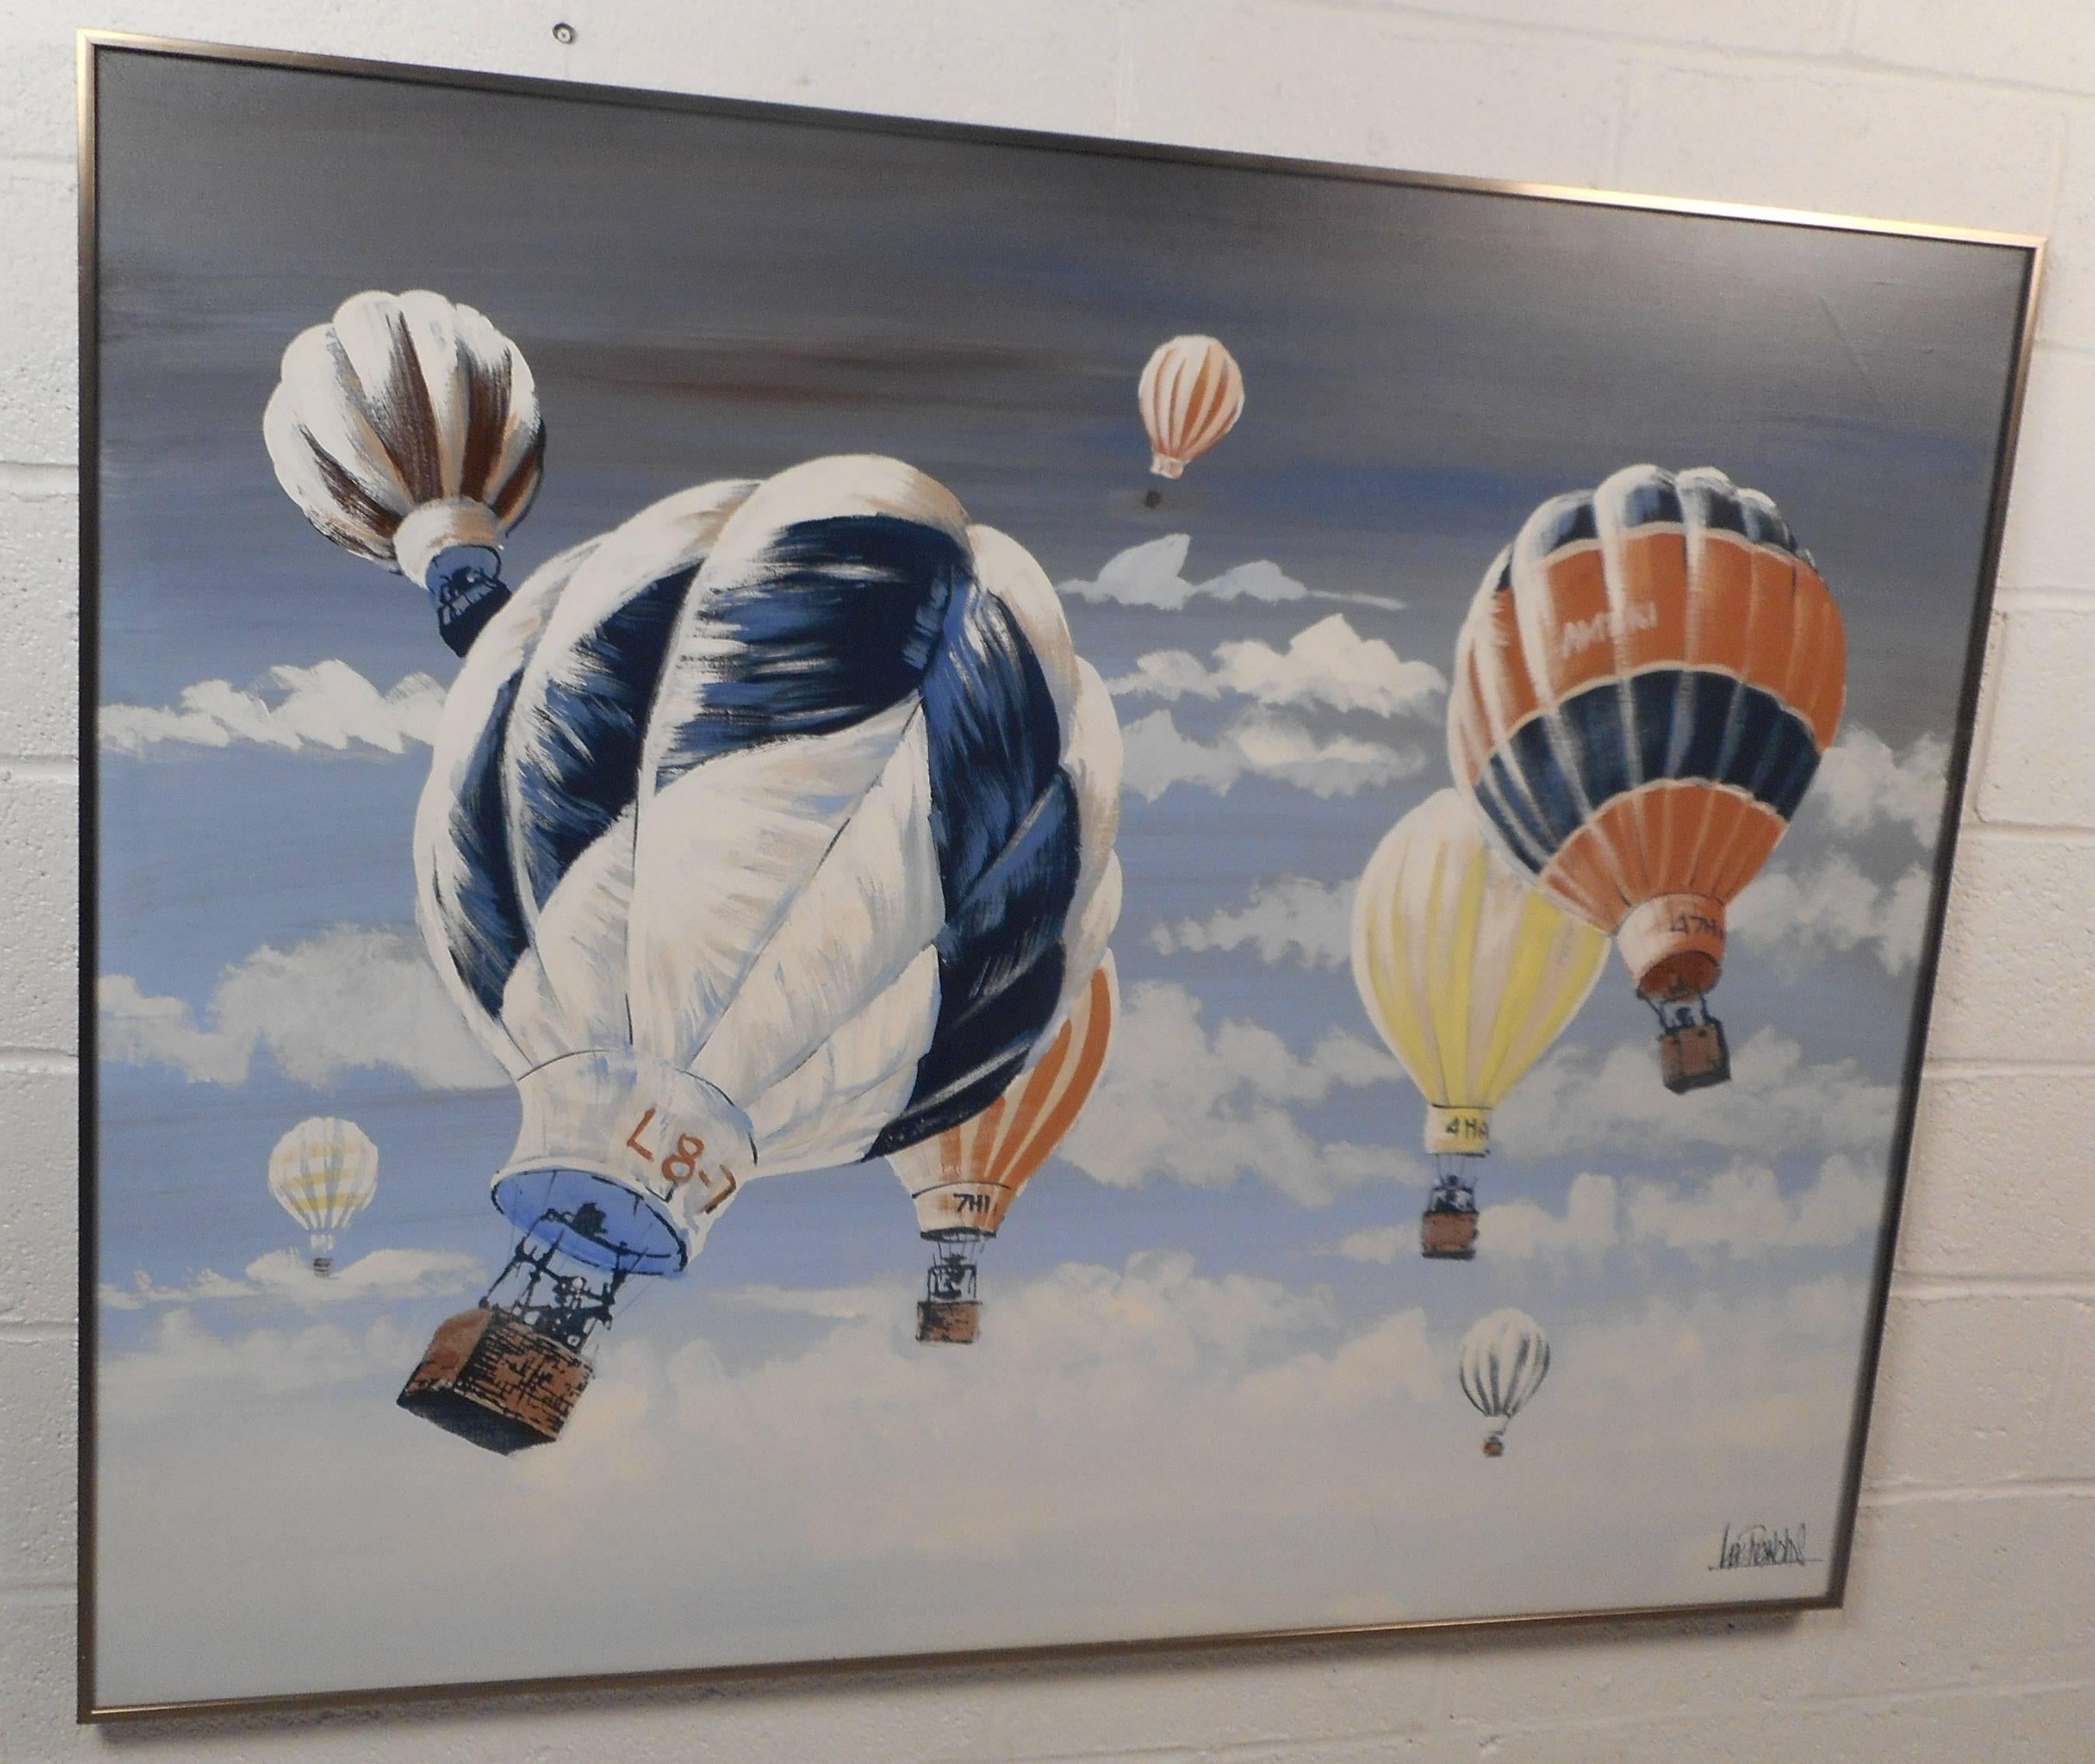 This stunning vintage modern oil painting by manufacturer Lee Reynolds features numerous hot air balloons coasting through the sky with a brass frame. This work of art displays intricate detail with a wide variety of colors. The majestic scene